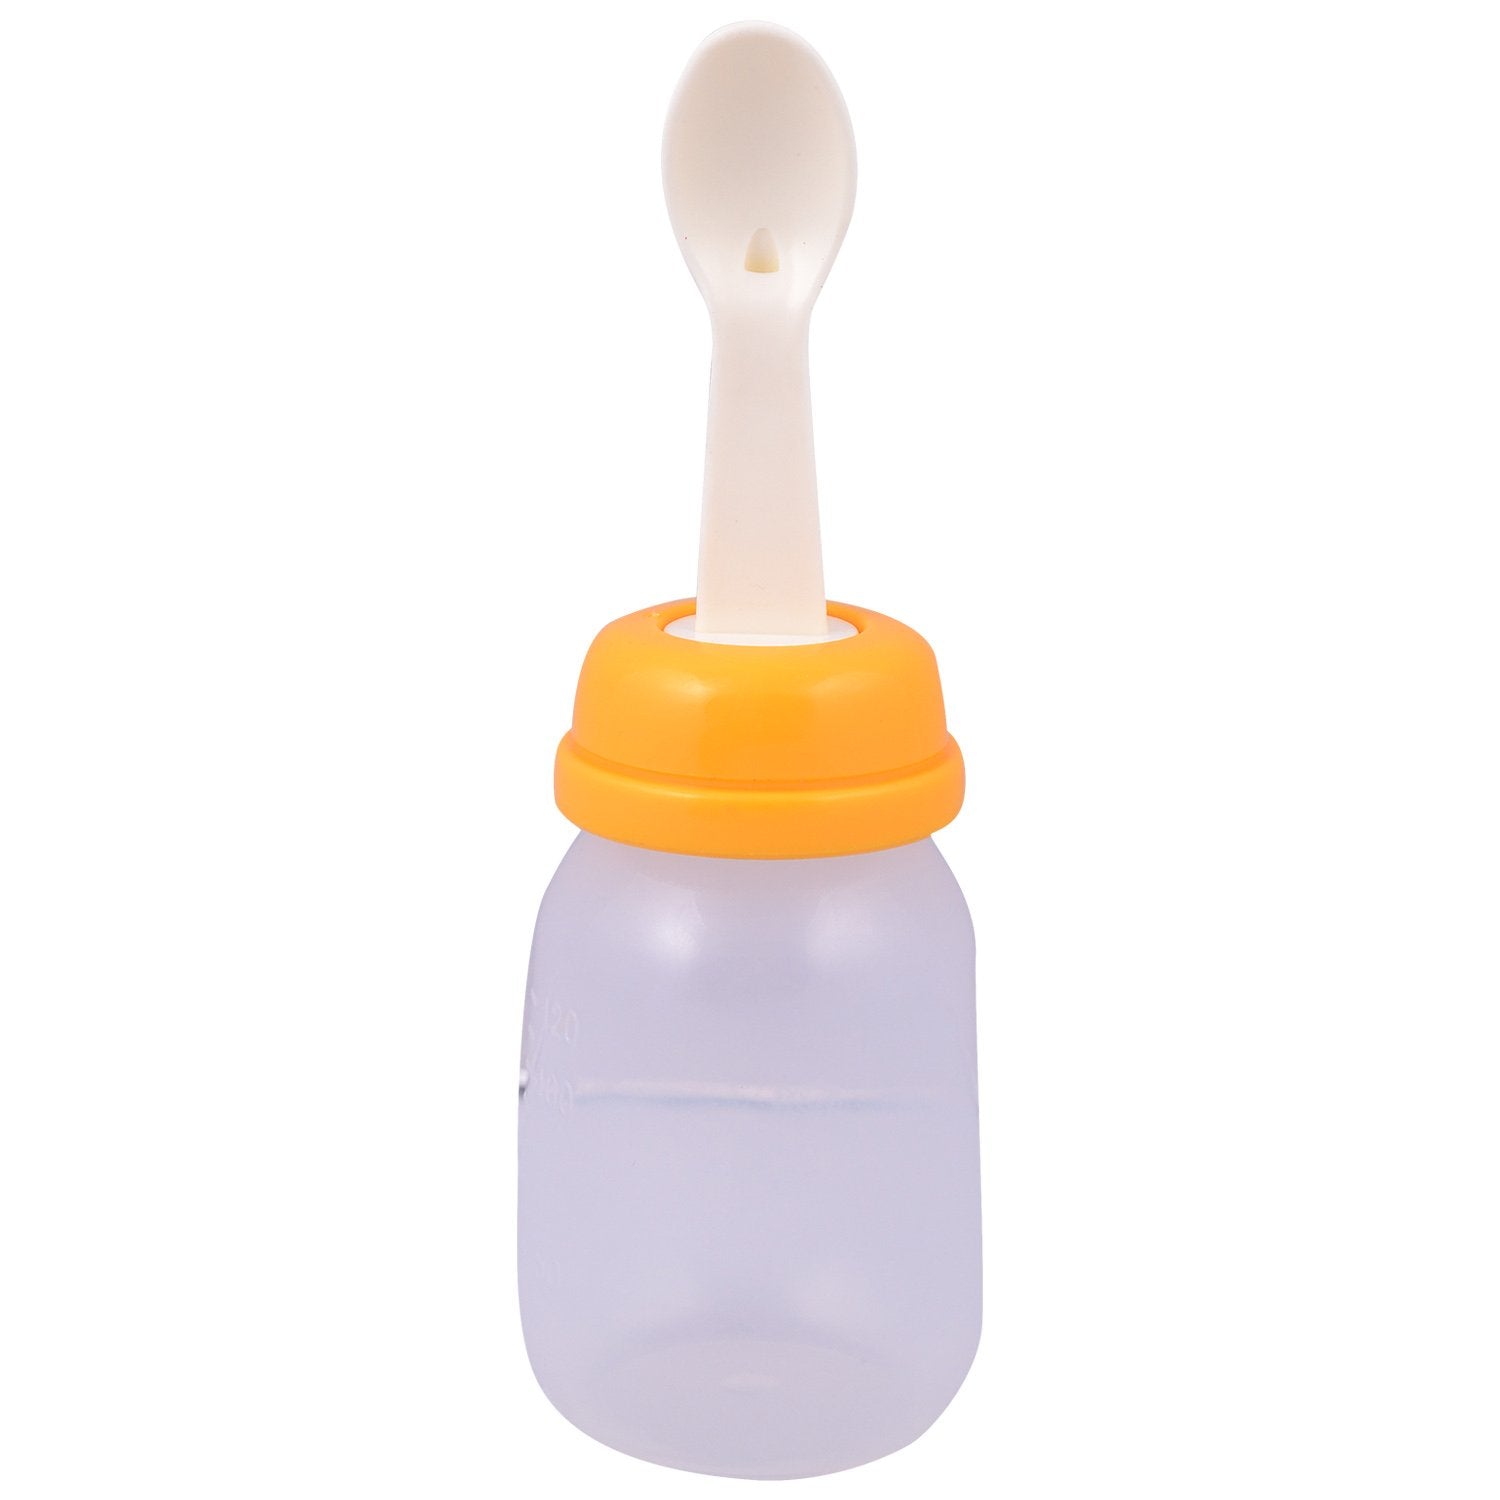 Bottle with Spoon